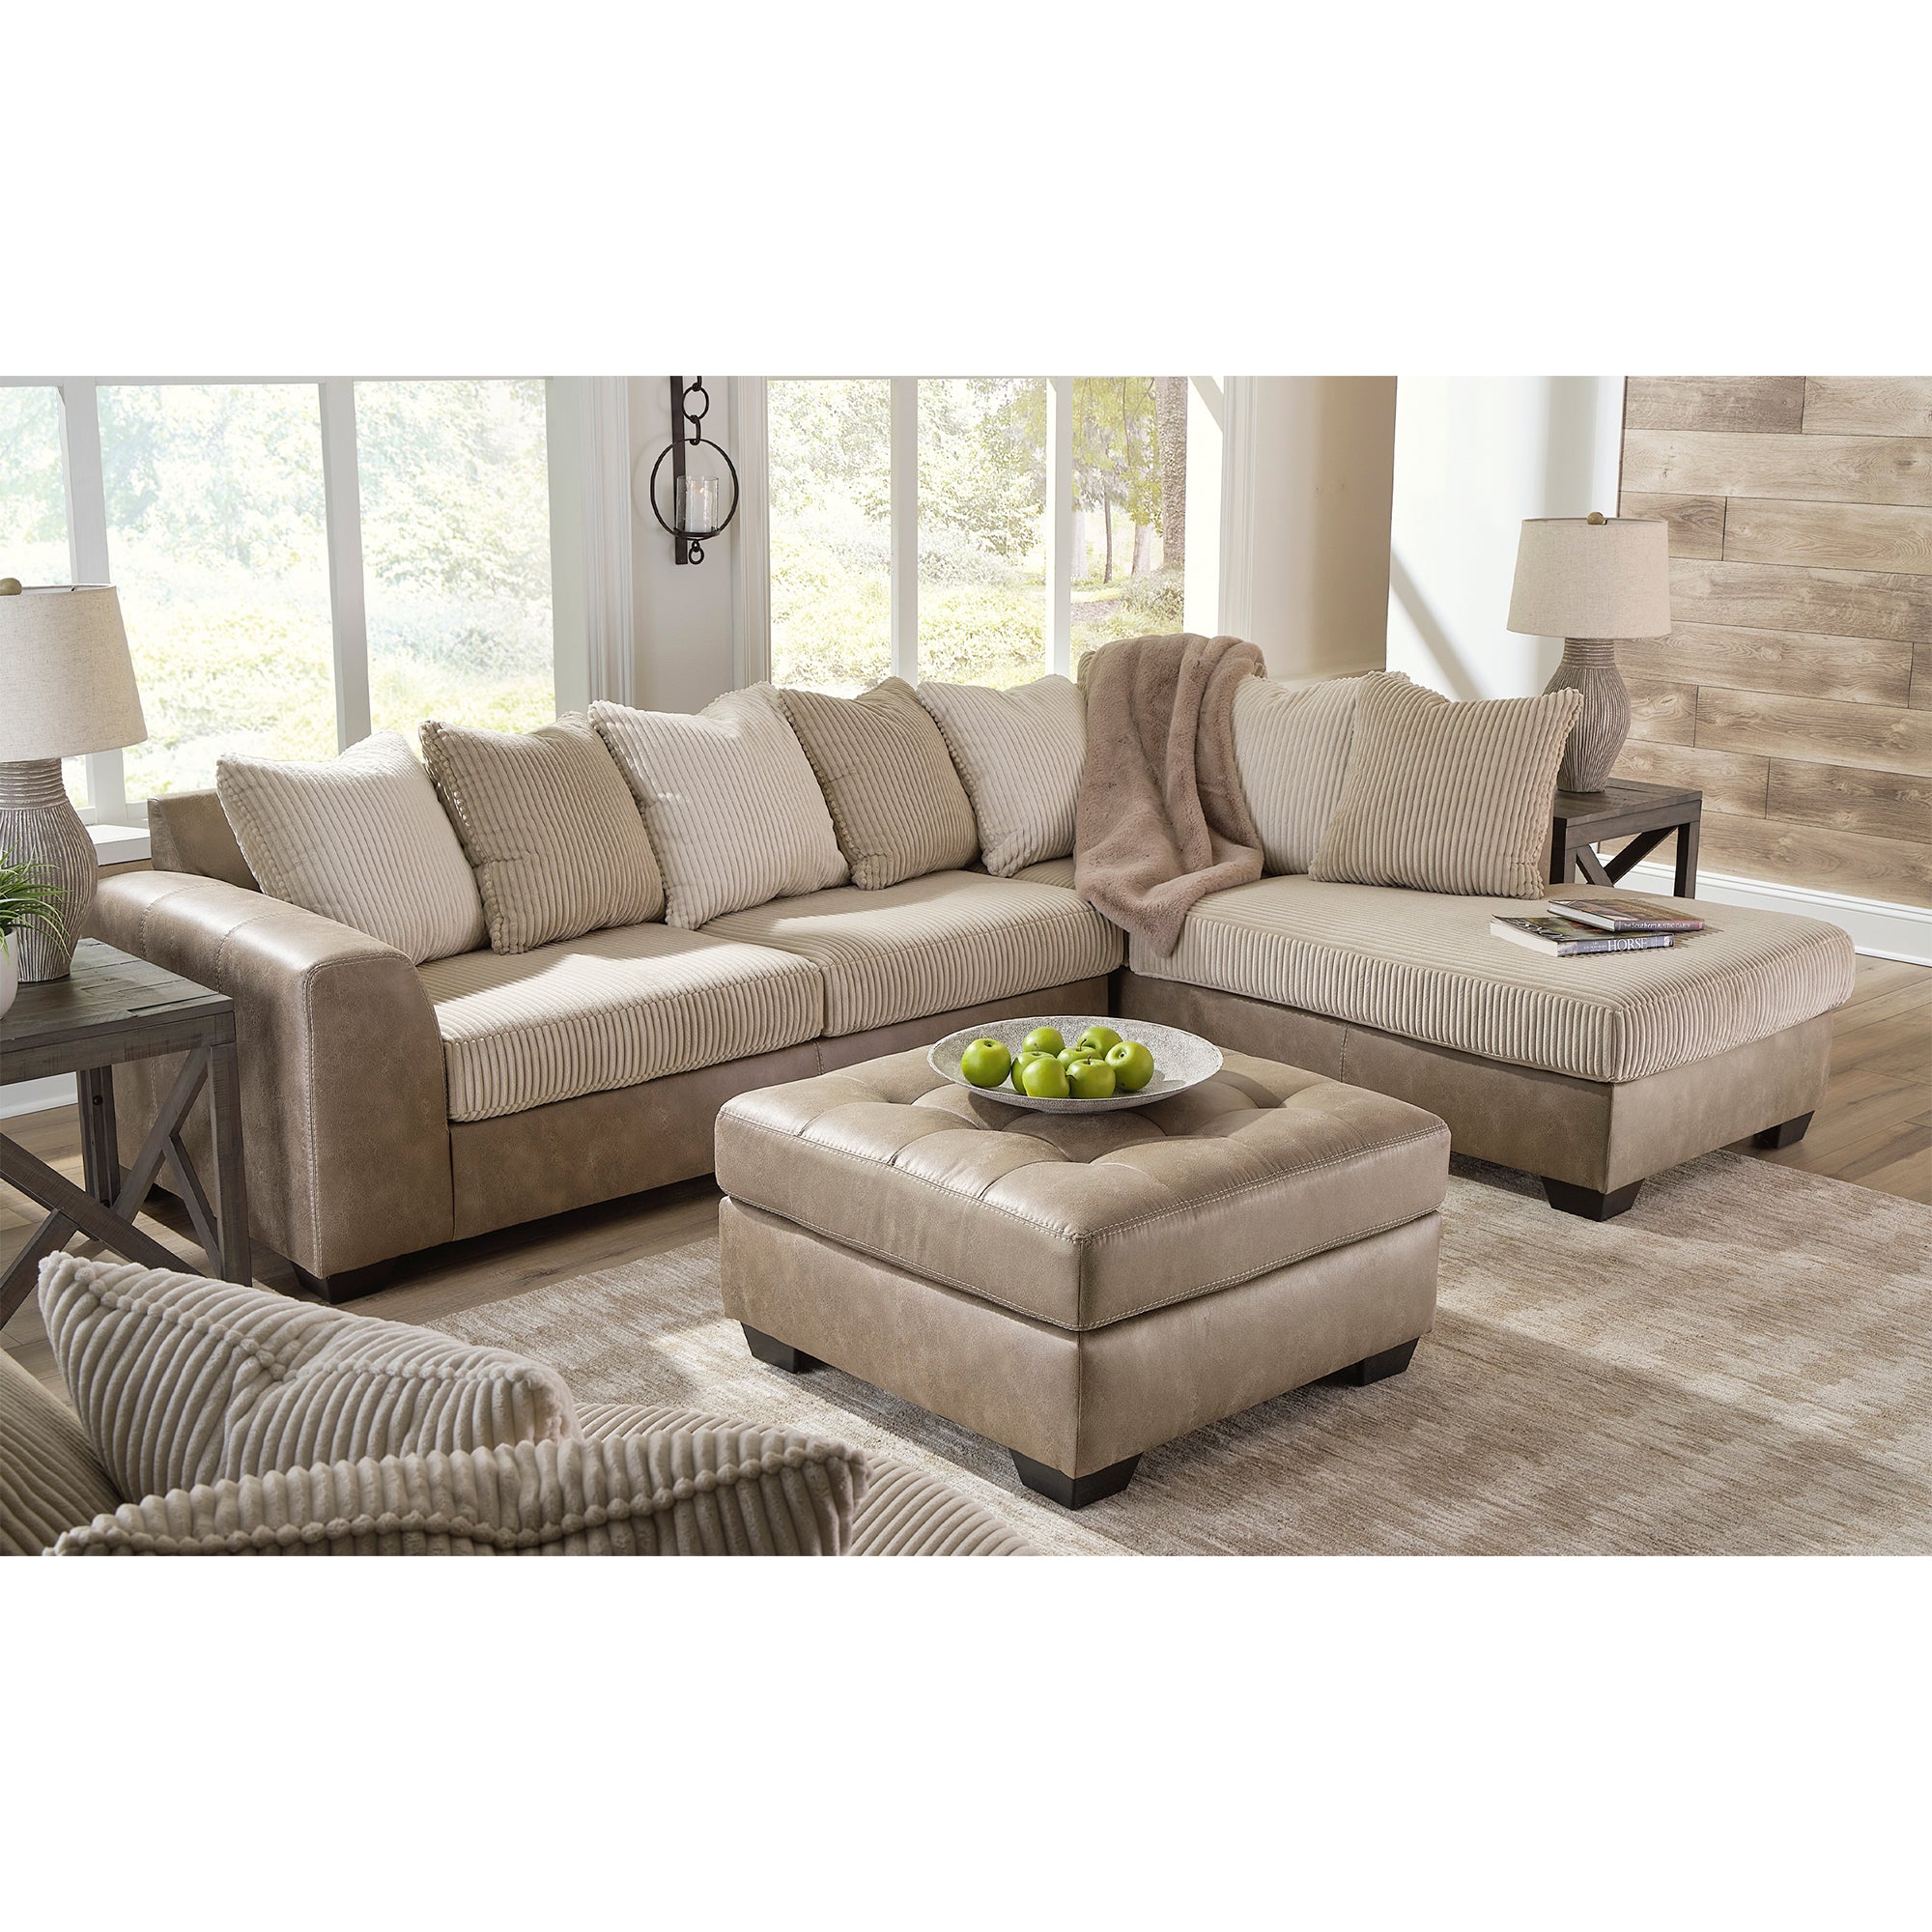 Keskin 2-Piece Sectional with Chaise in Sand Color